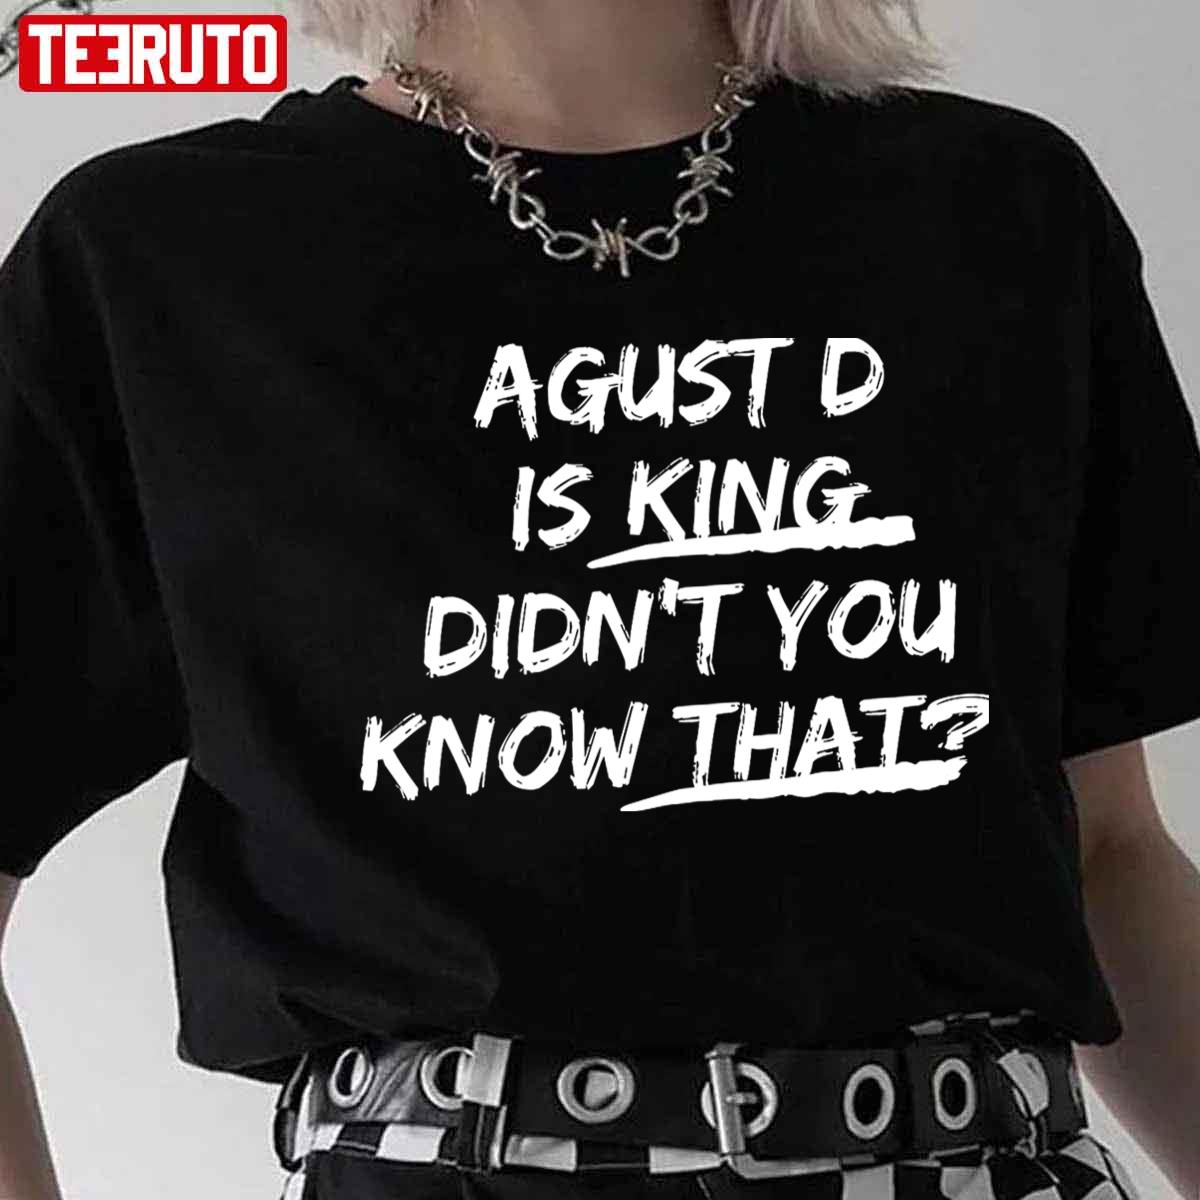 Agust D Is King Didn’t You Know That BTS SUGA Quote Unisex T-shirt